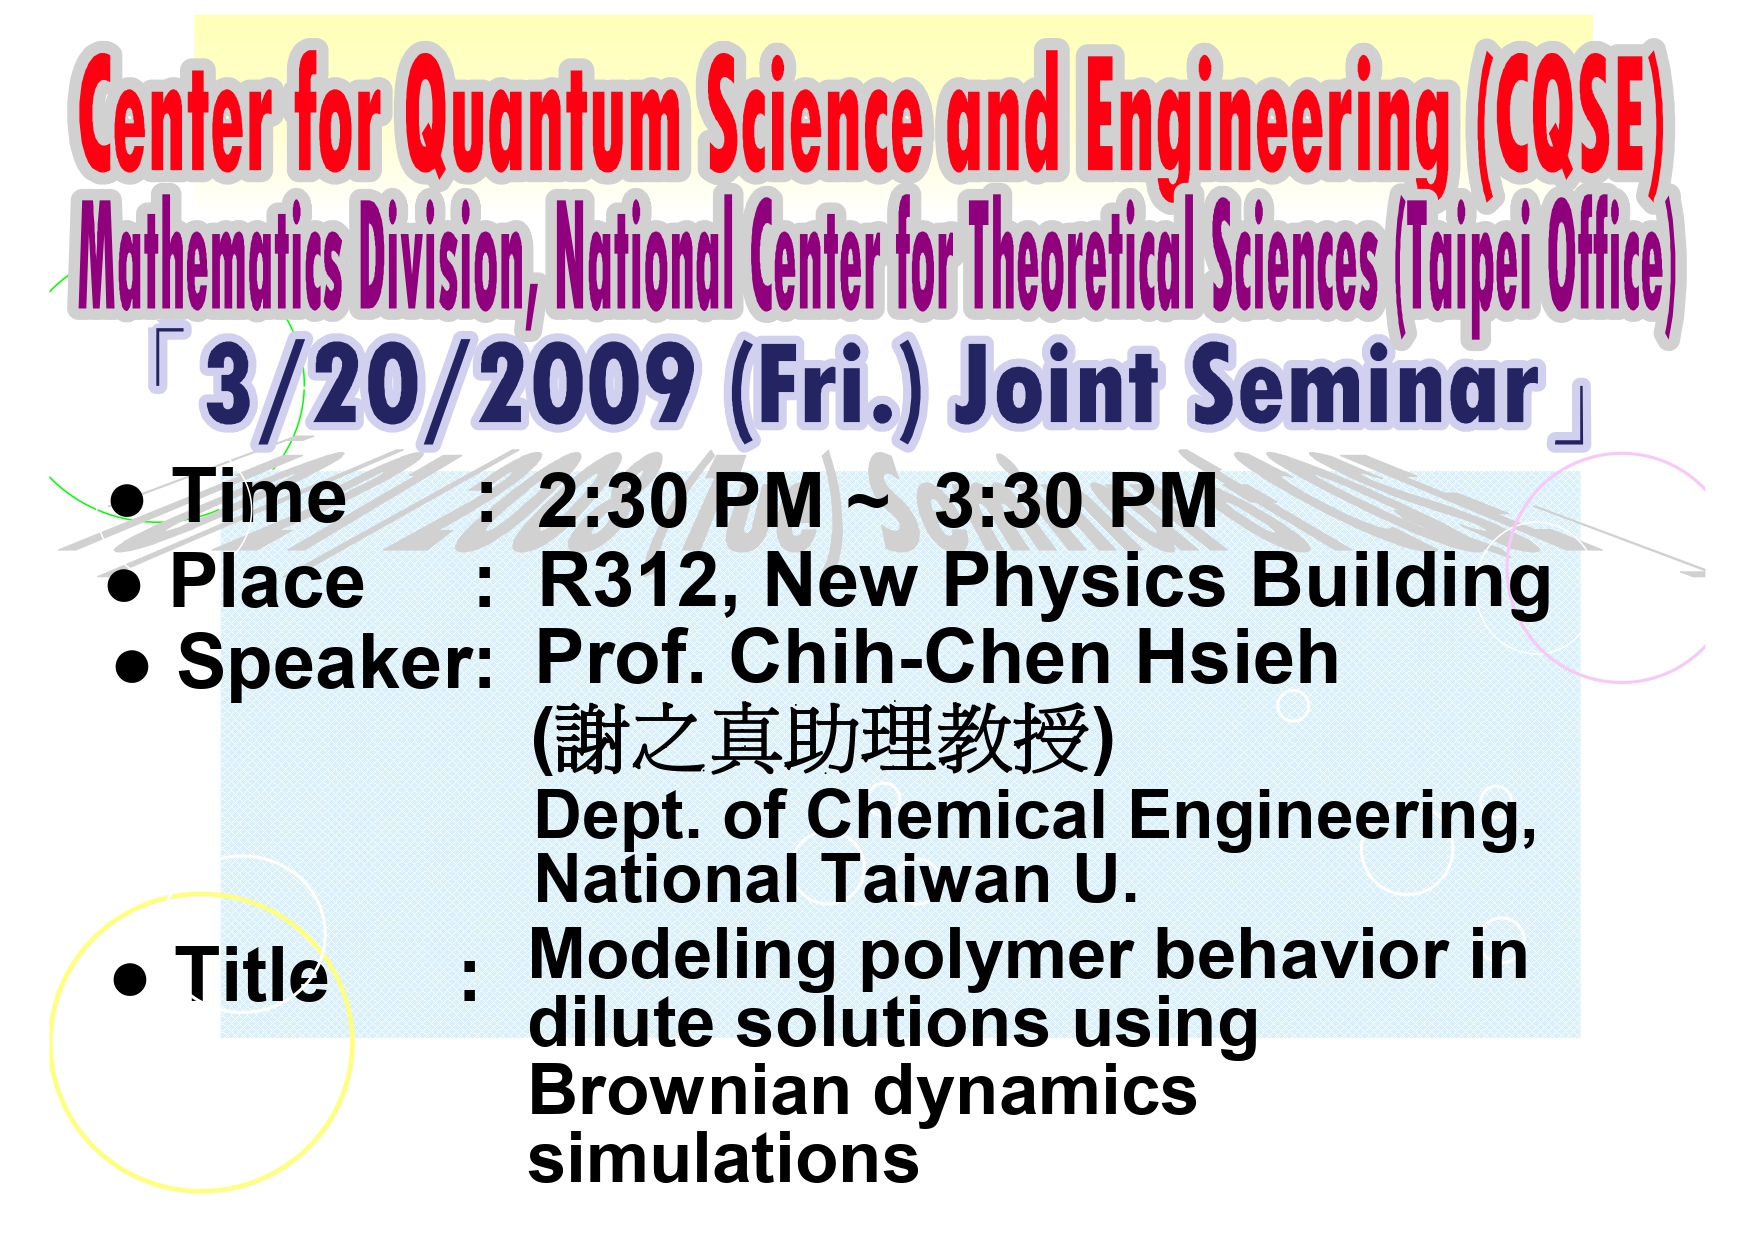 Joint Seminar of Center for Quantum Science and Engineering (CQSE) and Mathematics Division, National Center for Theoretical Sciences (Taipei Office)